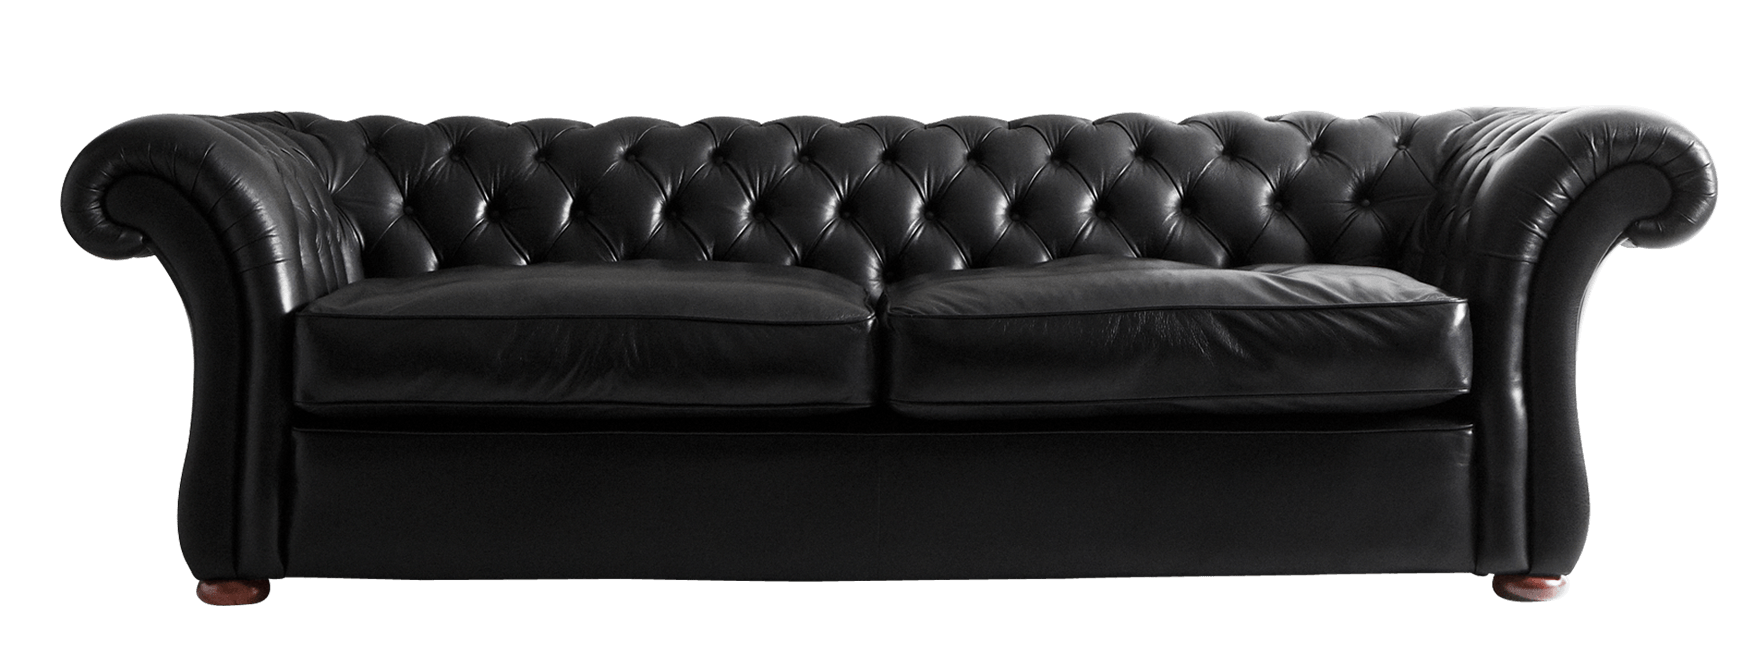 Black Leather Sofa PNG Photos